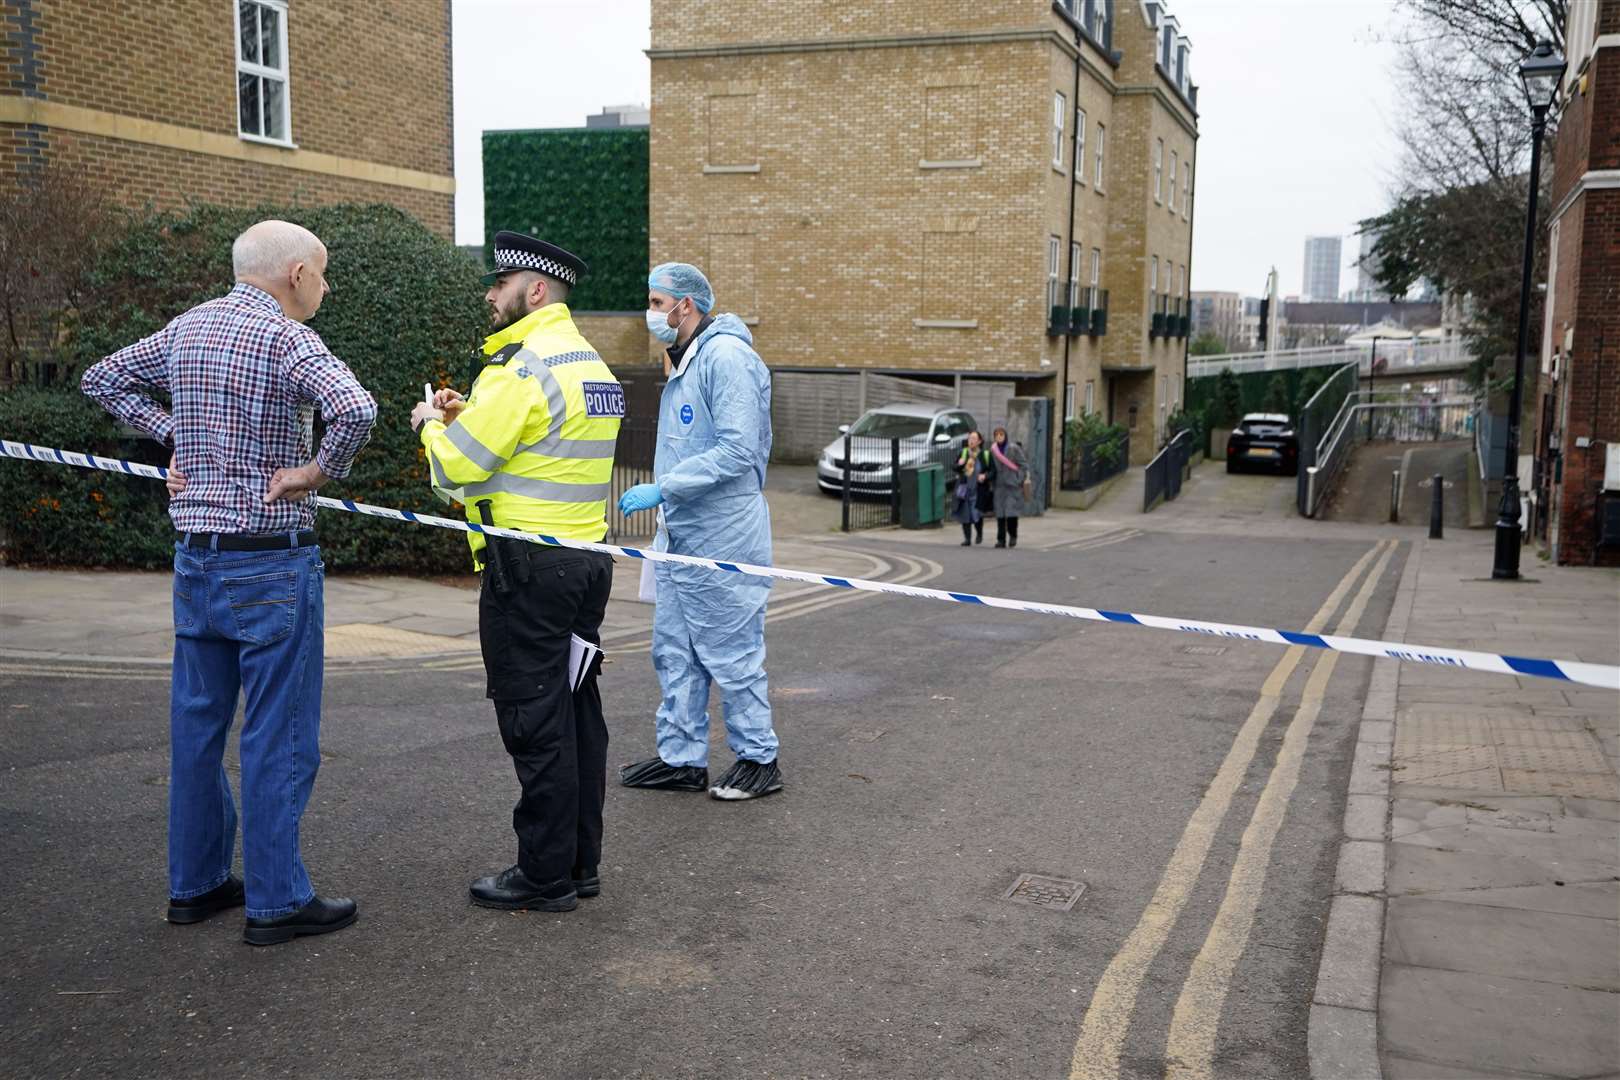 Police talk to residents at the scene (James Manning/PA)